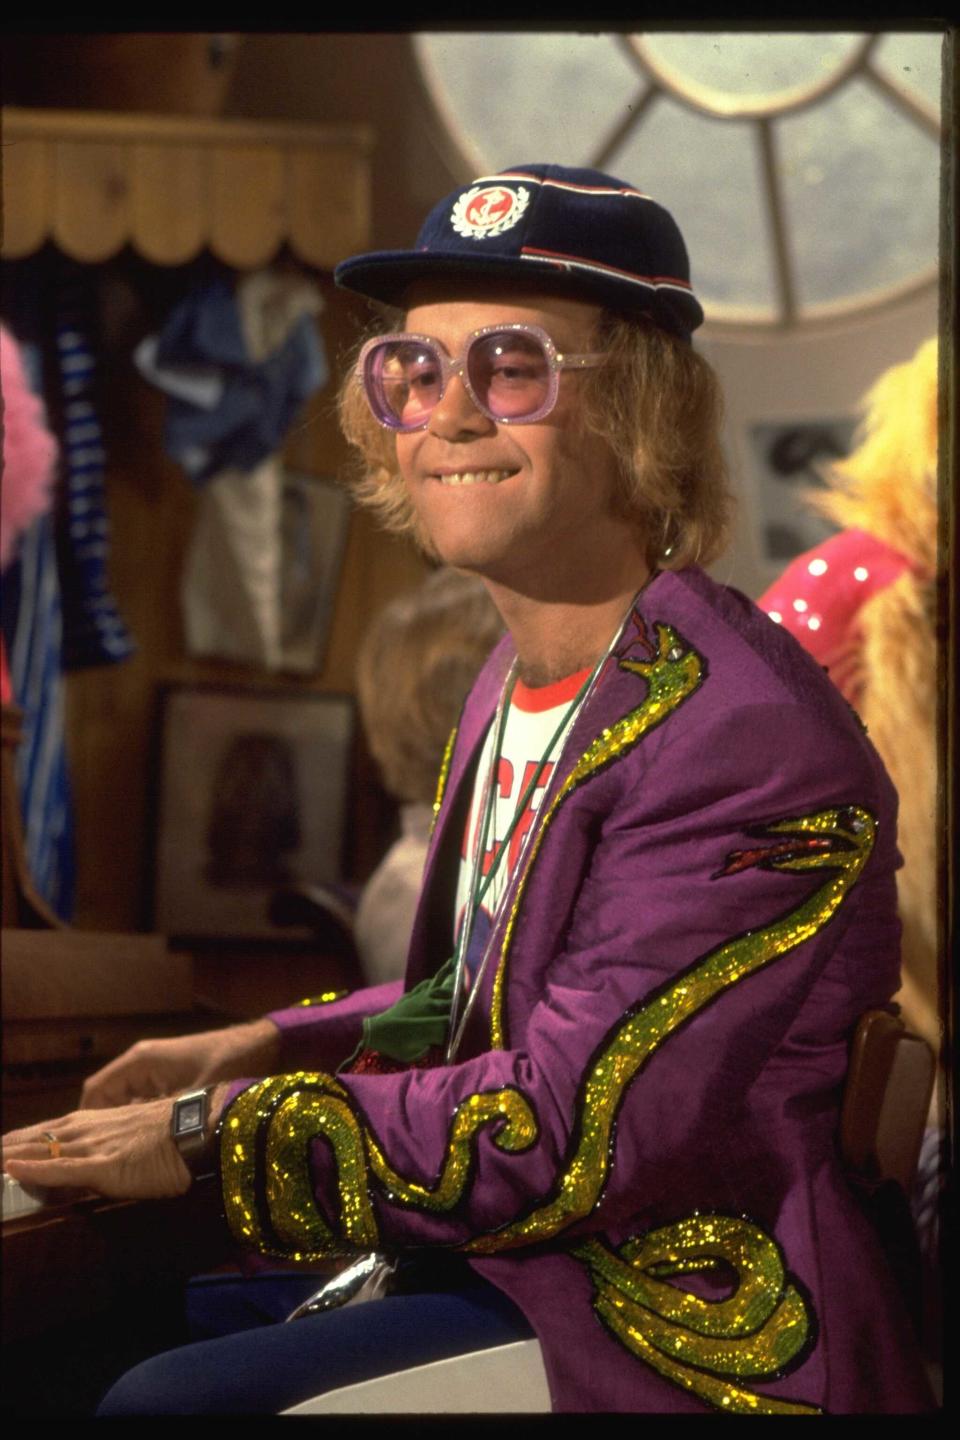 Elton John wears a vibrant jacket decorated with sparkling designs, a hat with a badge, and oversized glasses while sitting at a piano